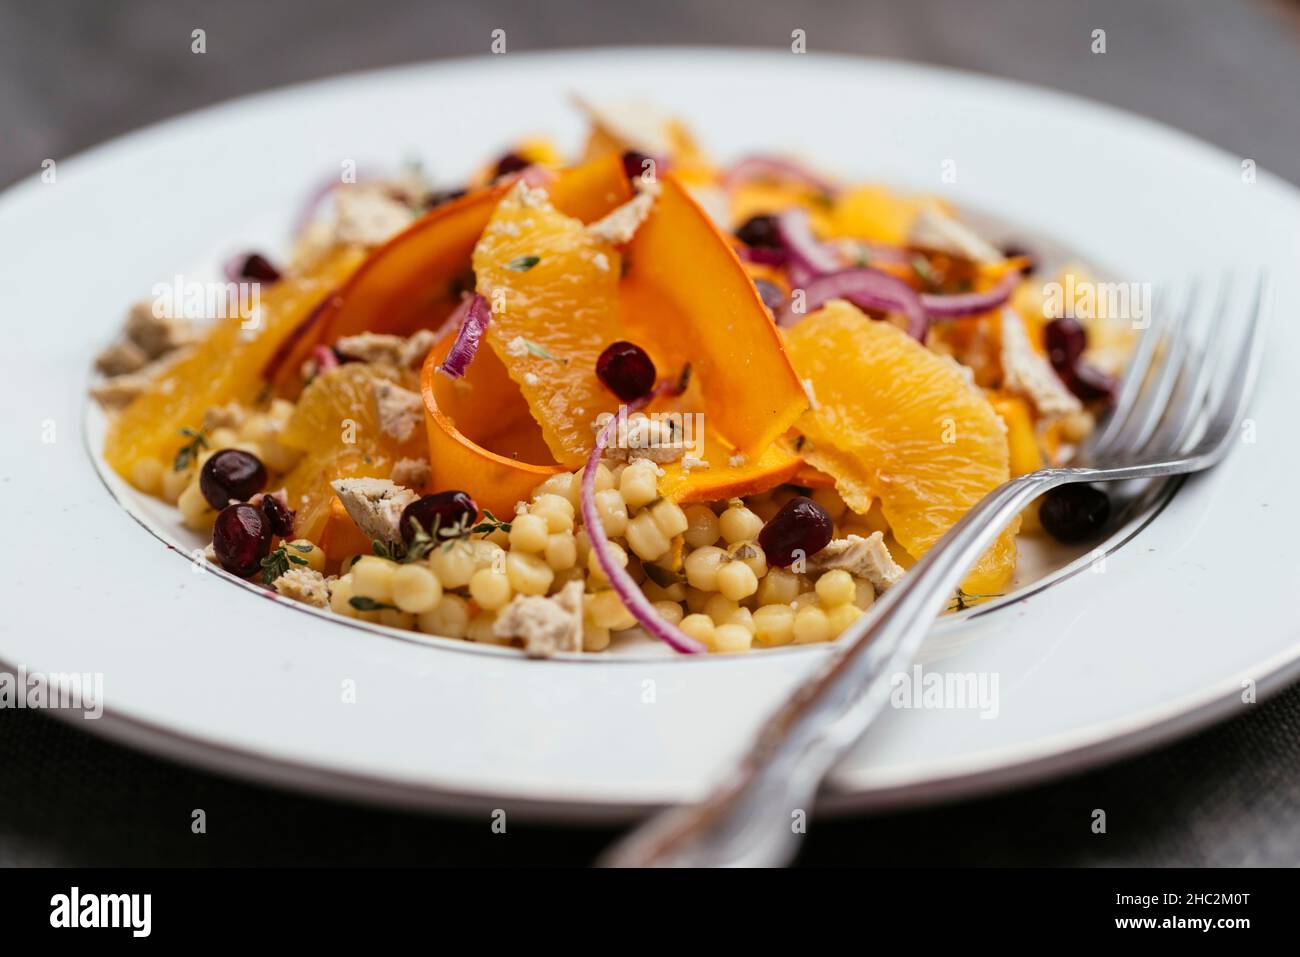 Salad with marinated winter squash,  oranges and vegan feta on perl couscous. Stock Photo